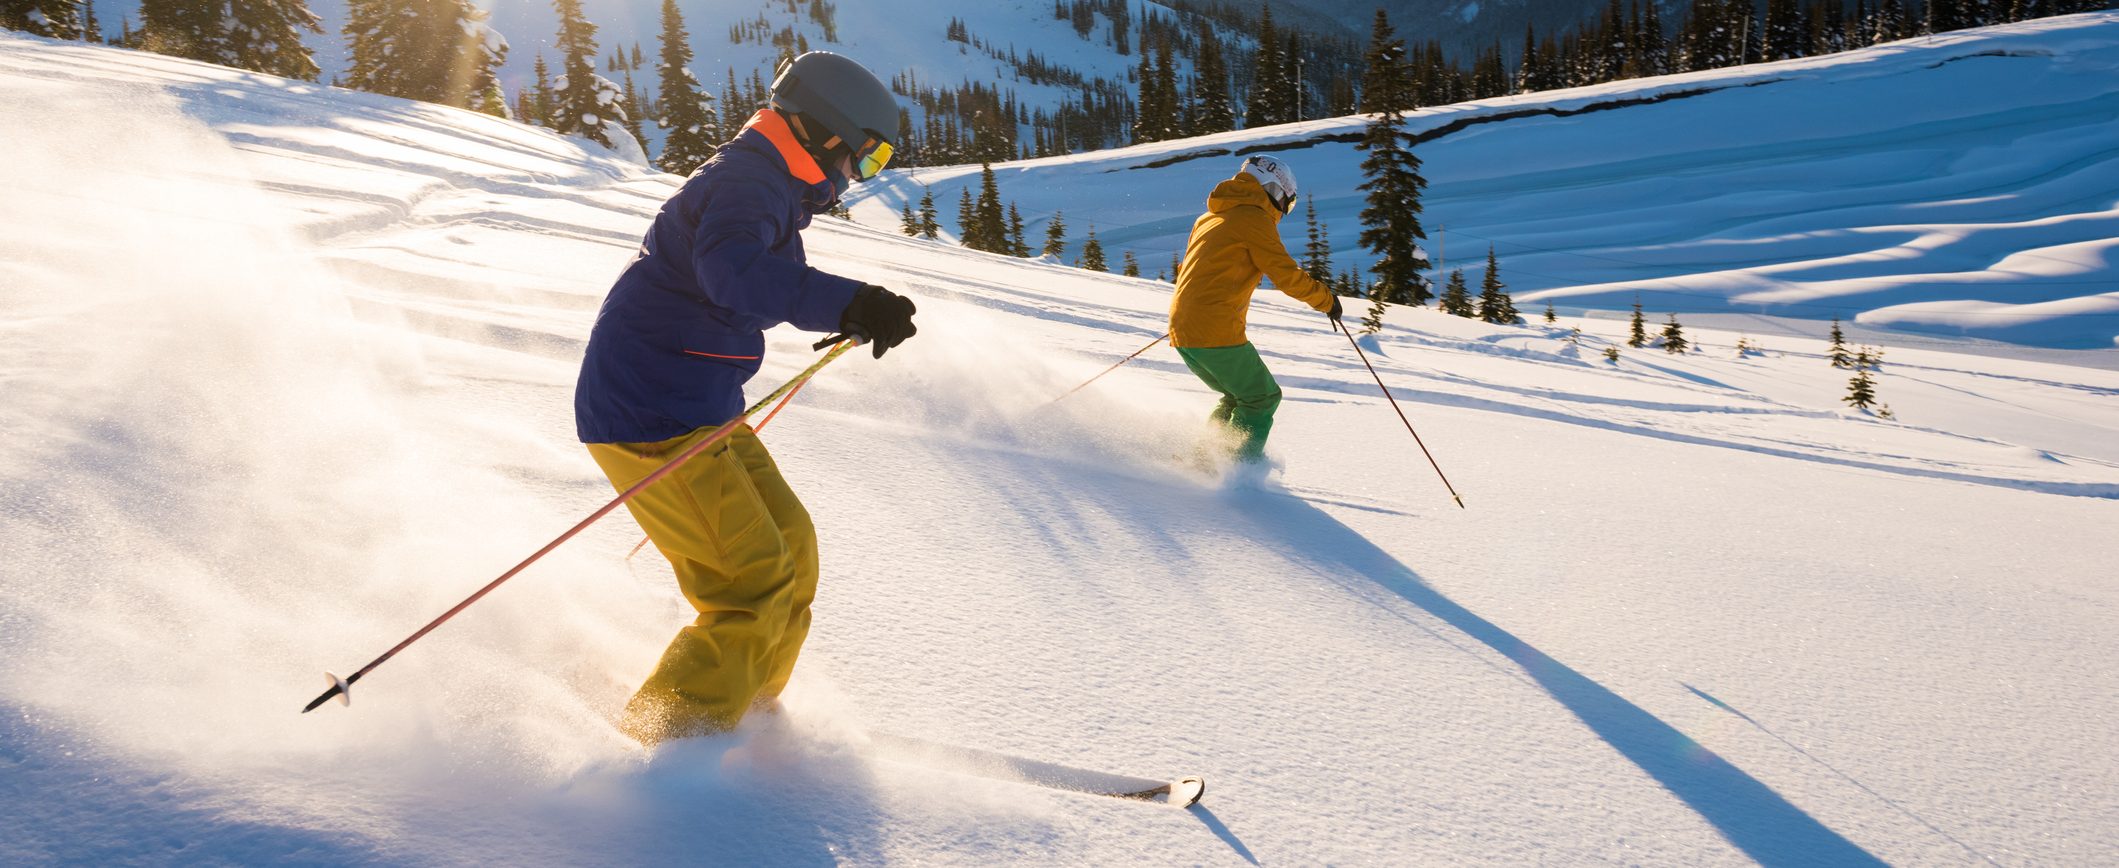 Two people ski a slope fringed with evergreen trees.